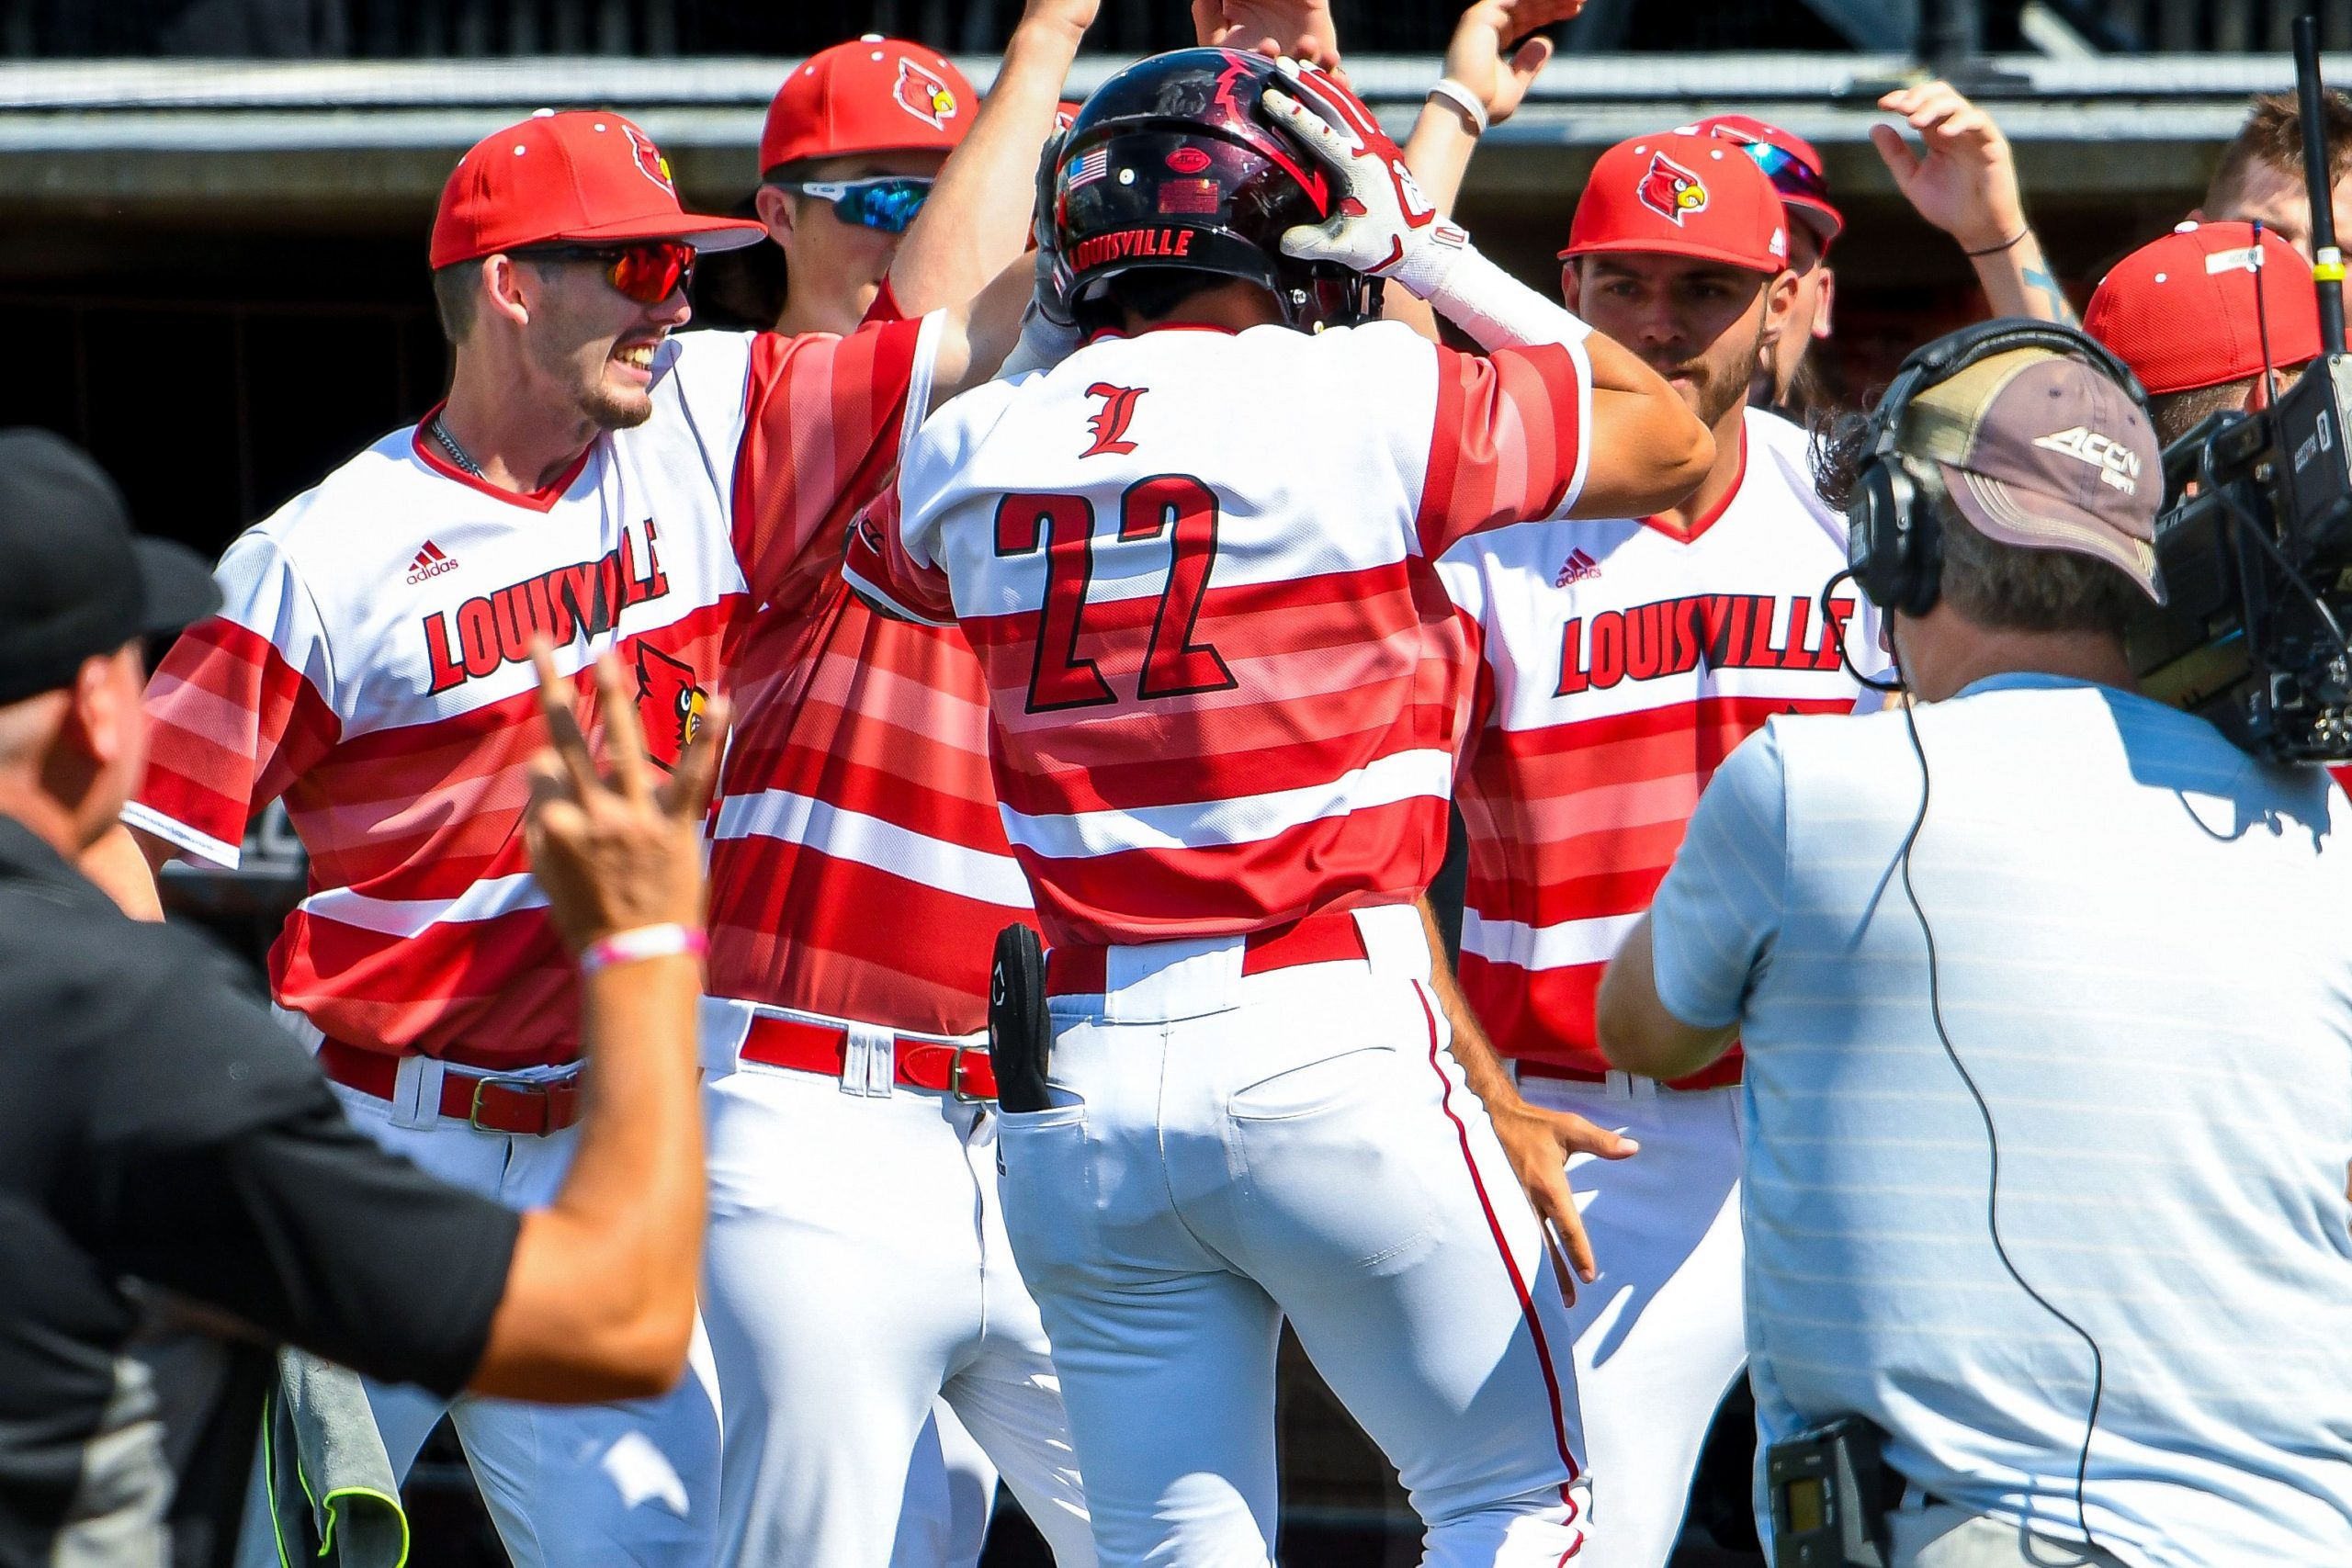 Louisville baseball guide to the 2022 MLB Draft